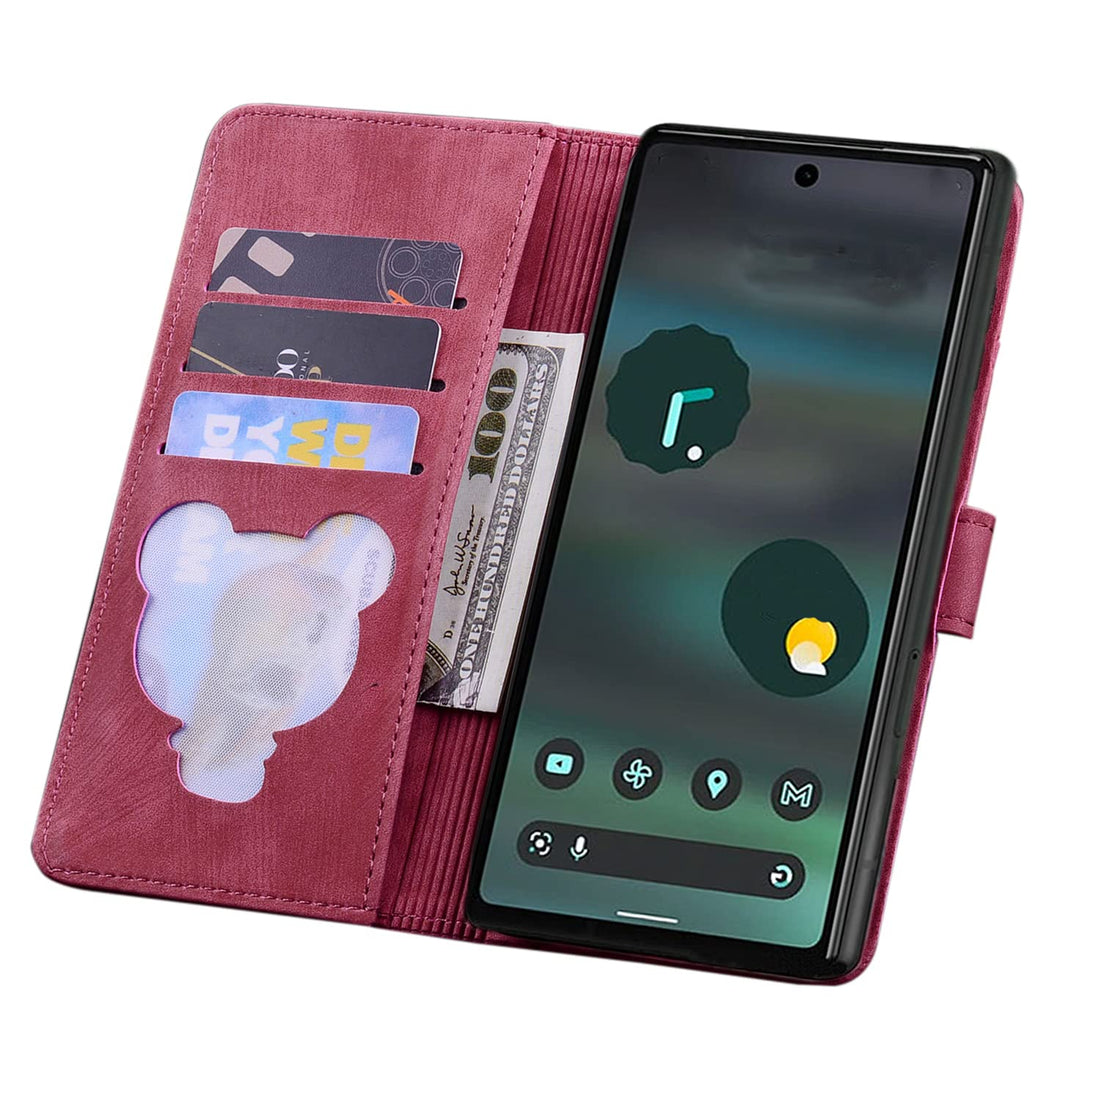 Rosbtib Flip Case Compatible with Google Pixel 8 Pro, Premium PU Leather Magnetic Closure Cover with Full Body Shockproof Wallet Phone Case for Pixel 8 Pro - Cherry Red